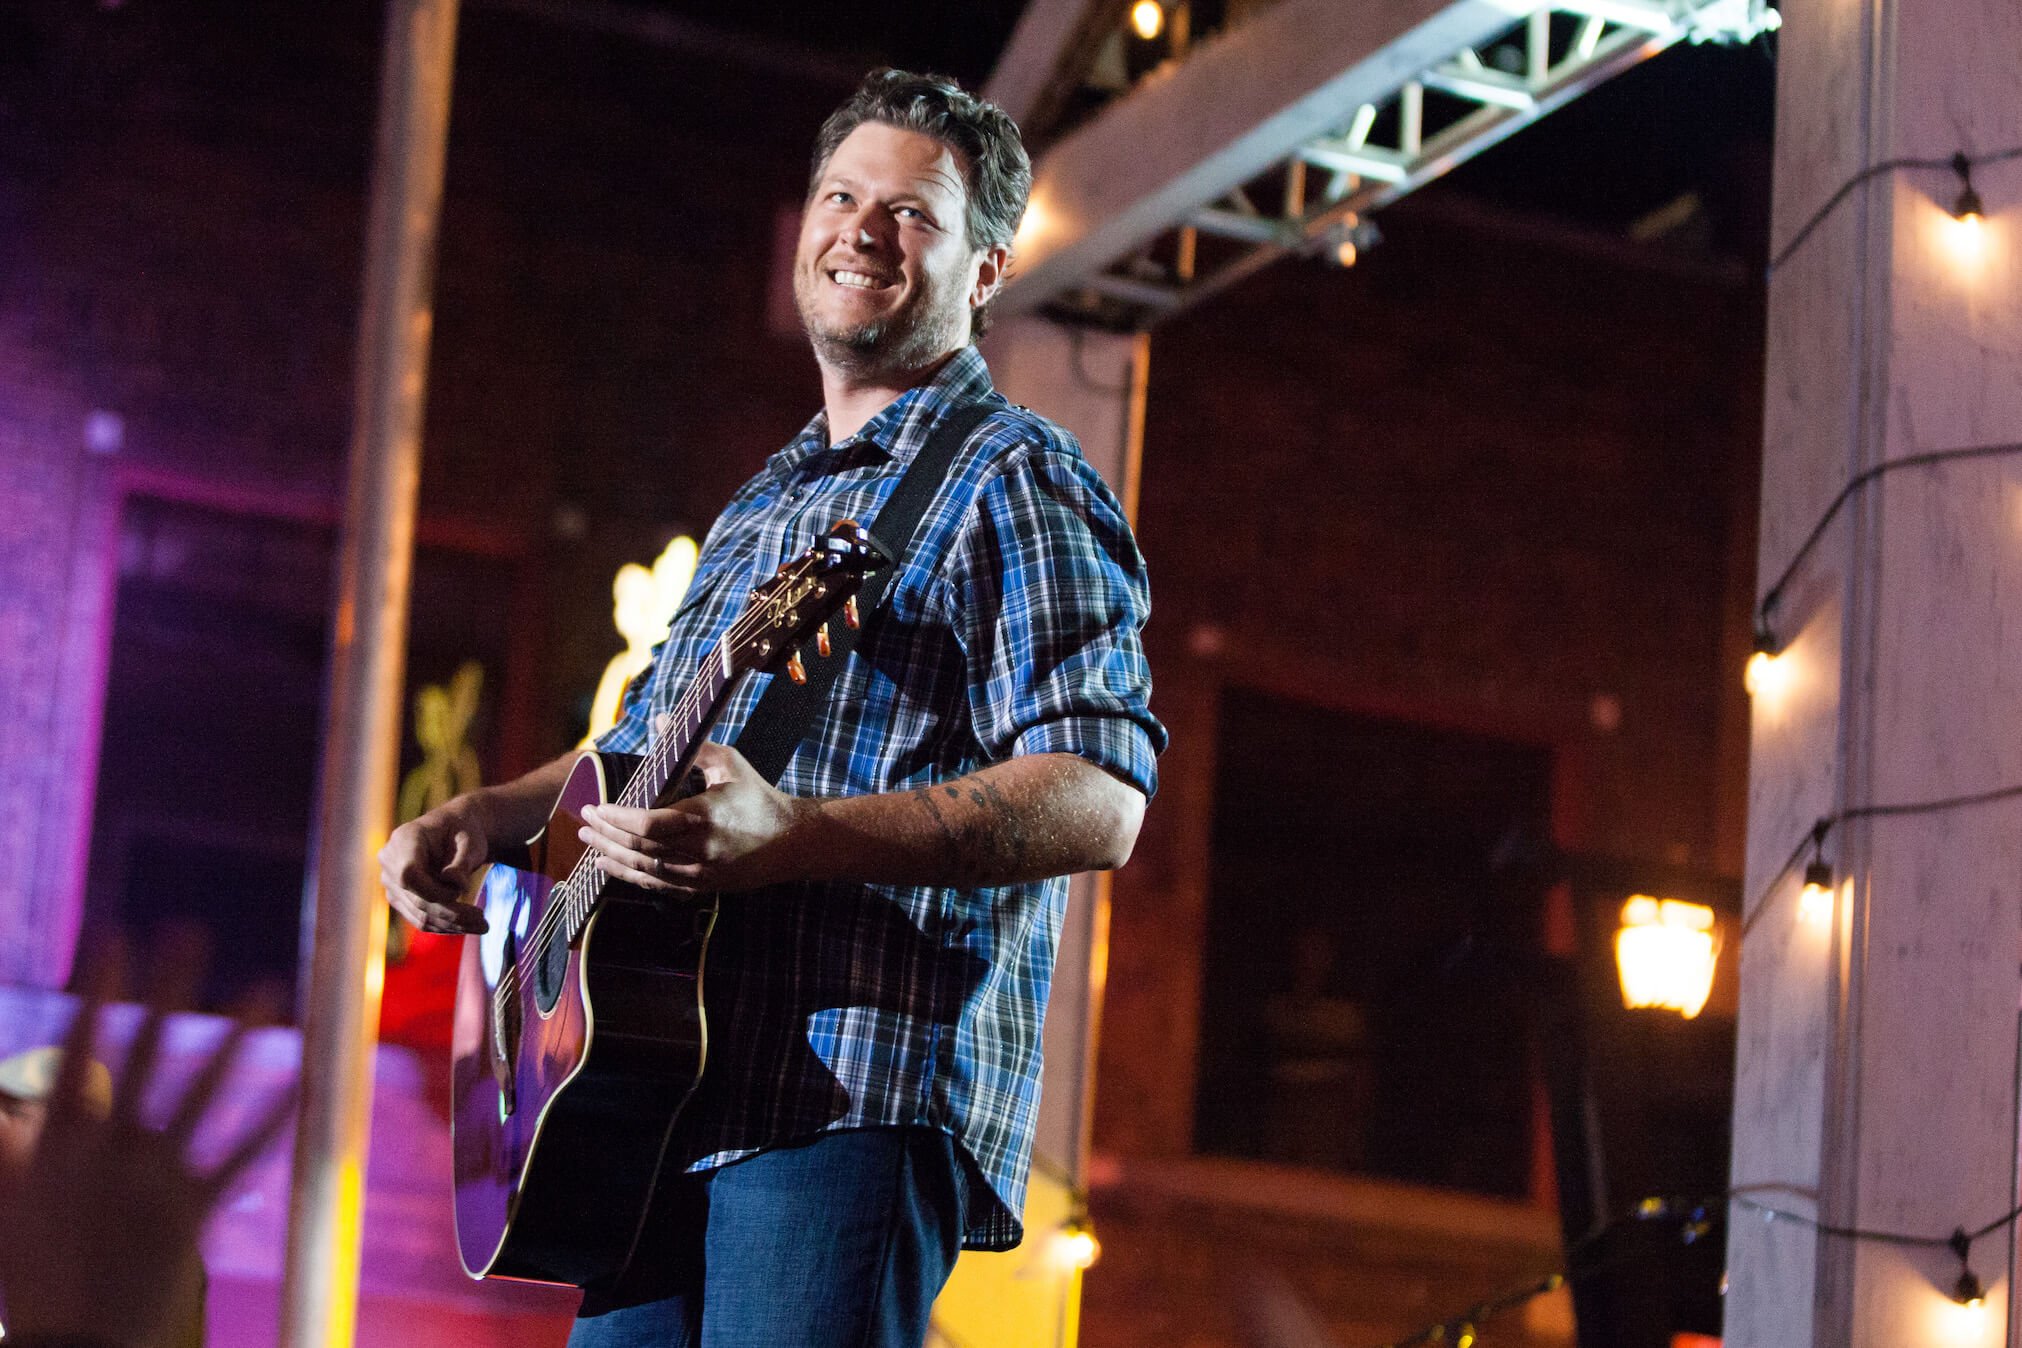 Blake Shelton holding a guitar and smiling during a concert